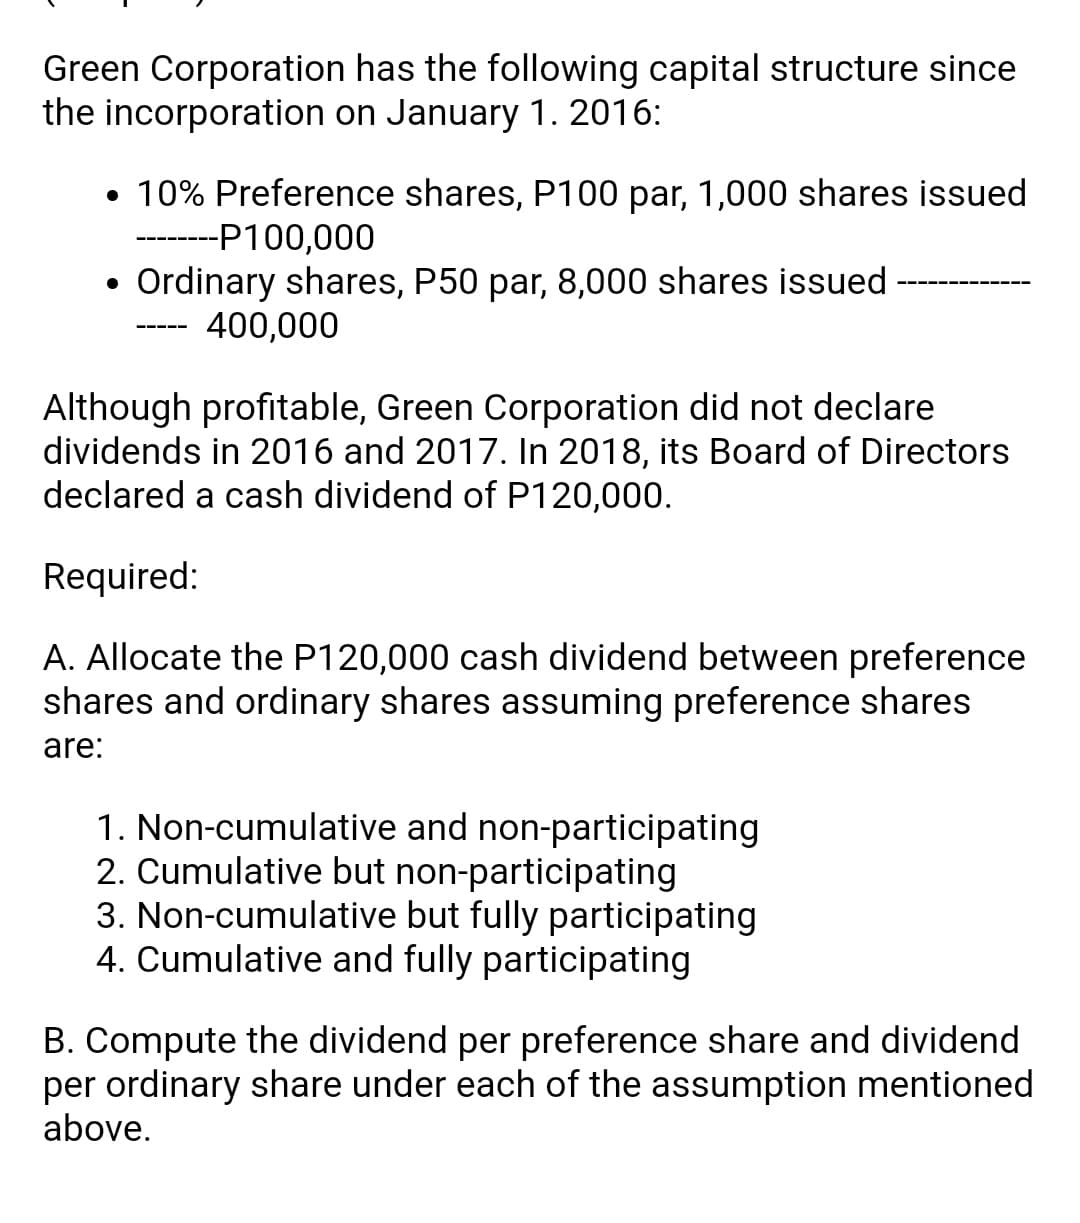 Green Corporation has the following capital structure since
the incorporation on January 1. 2016:
• 10% Preference shares, P100 par, 1,000 shares issued
-P100,000
Ordinary shares, P50 par, 8,000 shares issued
400,000
Although profitable, Green Corporation did not declare
dividends in 2016 and 2017. In 2018, its Board of Directors
declared a cash dividend of P120,000.
Required:
A. Allocate the P120,000 cash dividend between preference
shares and ordinary shares assuming preference shares
are:
1. Non-cumulative and non-participating
2. Cumulative but non-participating
3. Non-cumulative but fully participating
4. Cumulative and fully participating
B. Compute the dividend per preference share and dividend
per ordinary share under each of the assumption mentioned
above.
